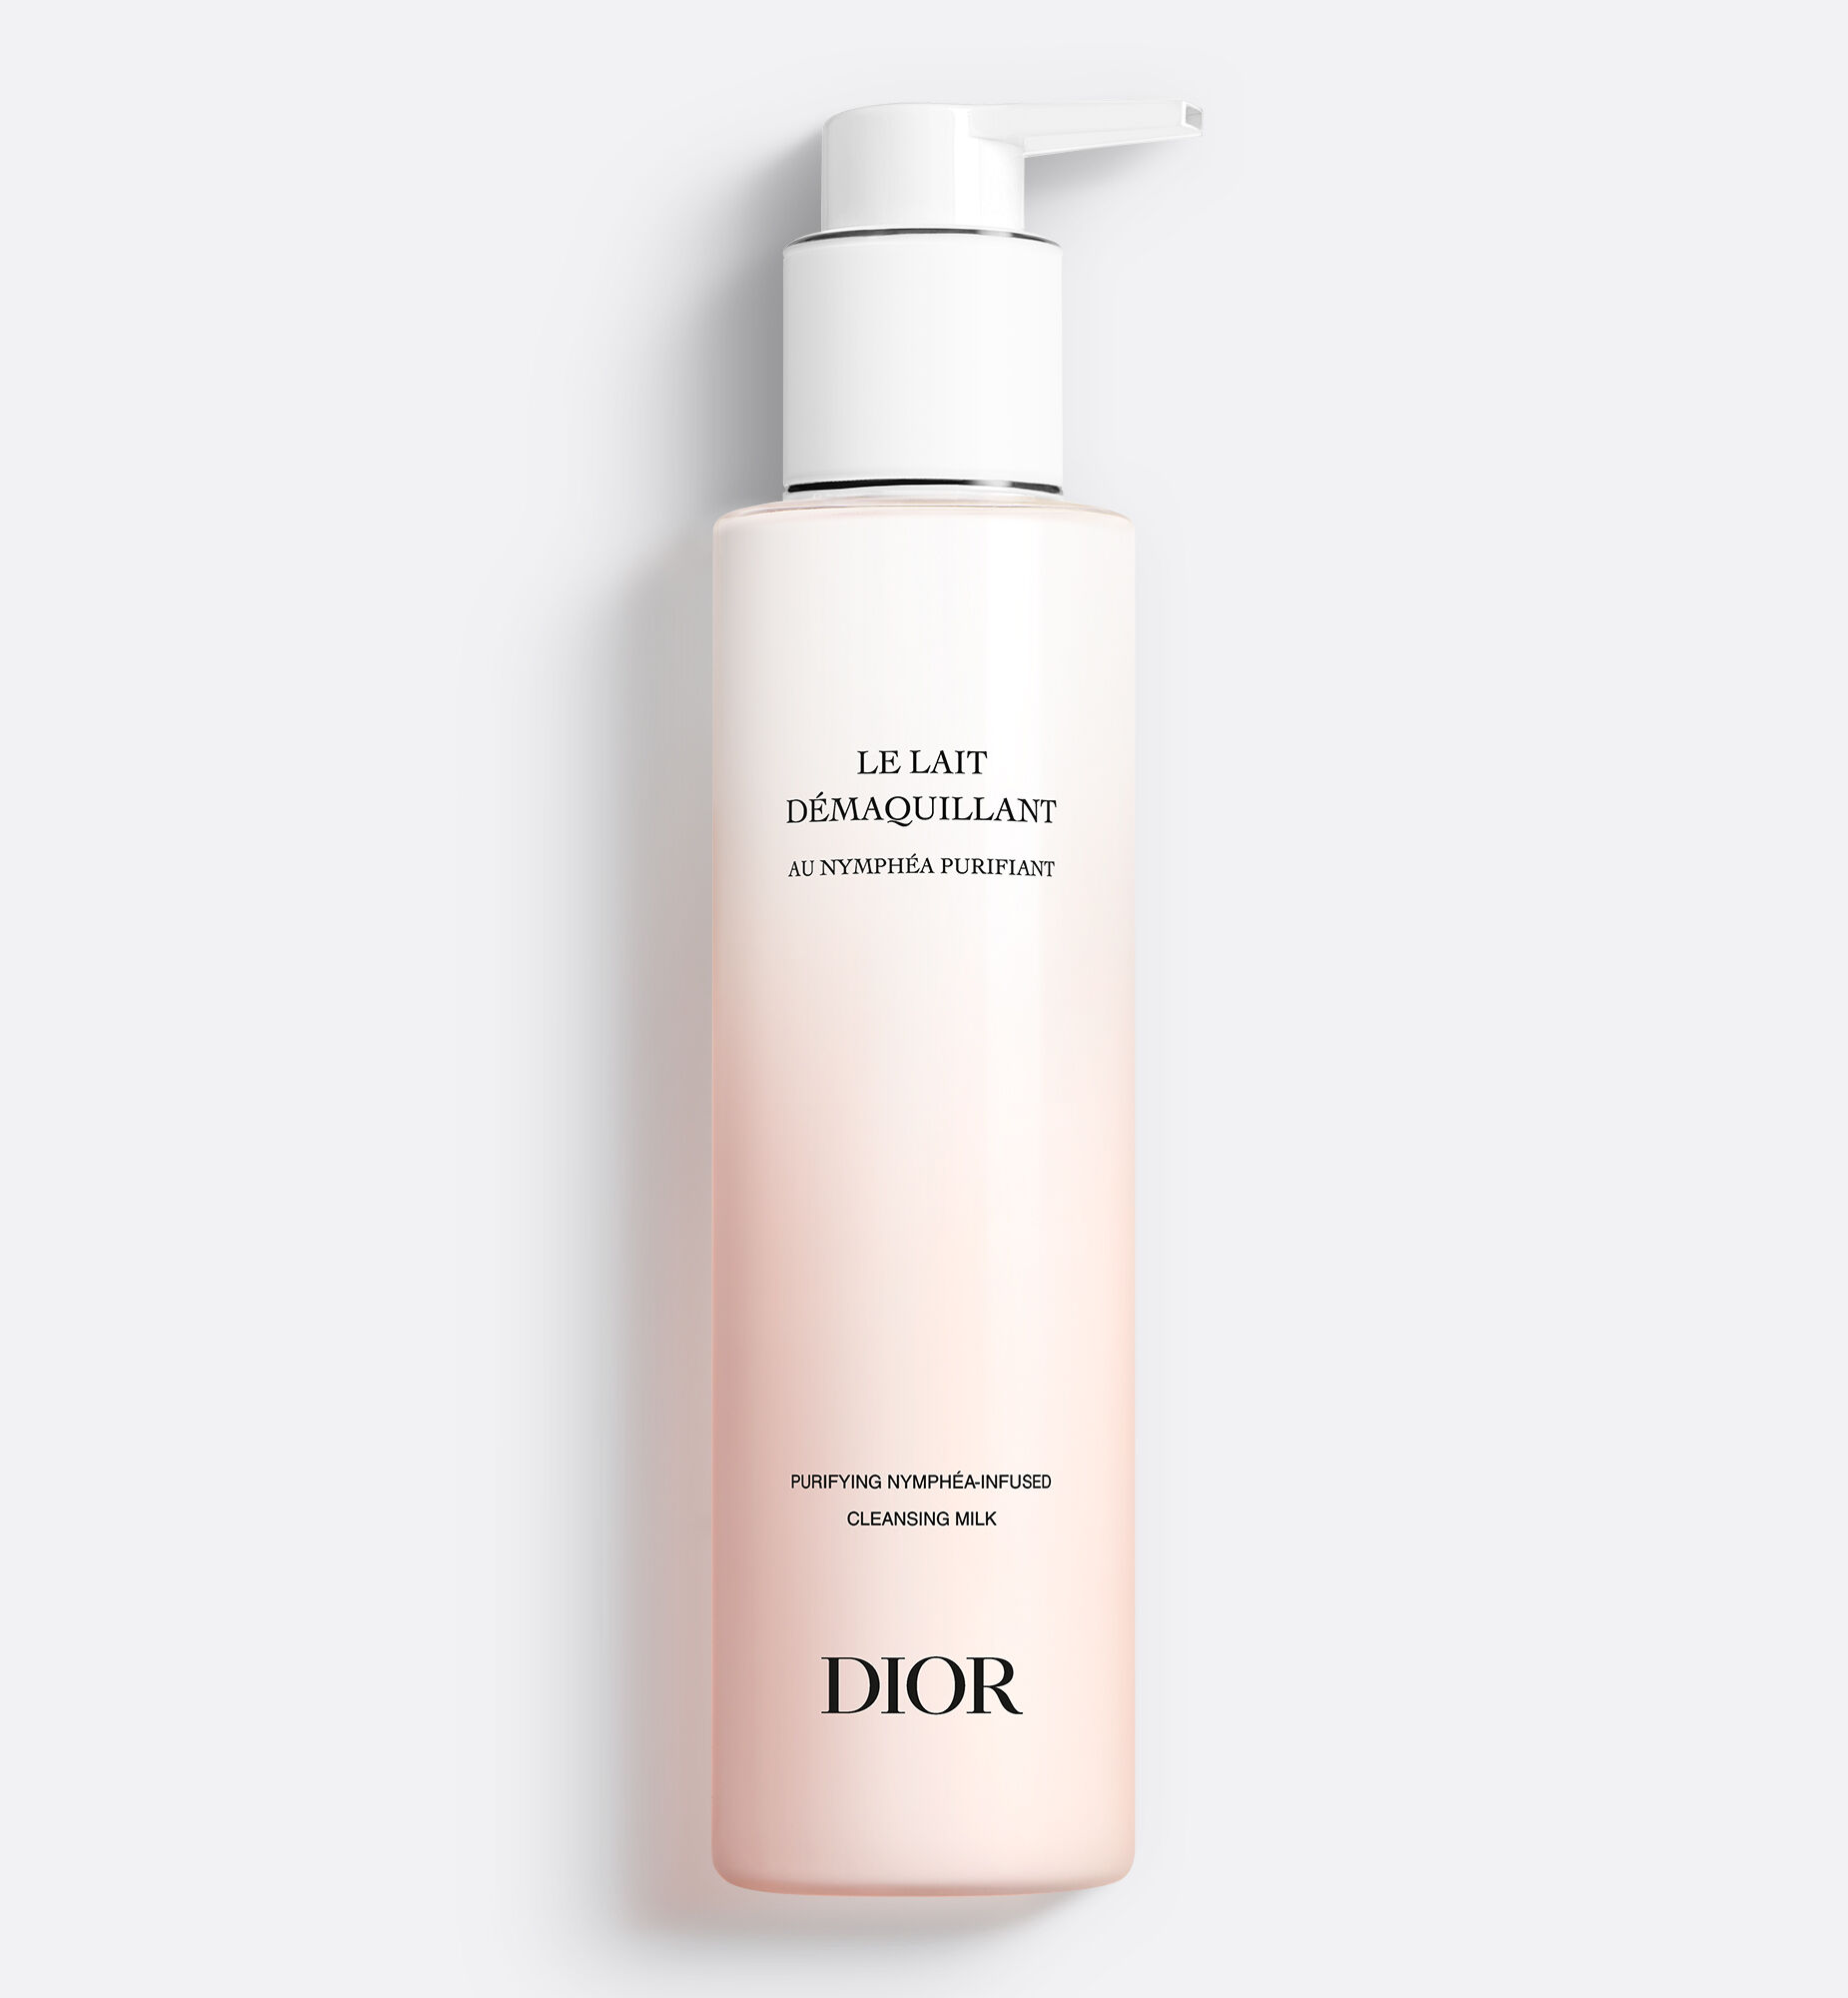 Dior HYDRA LIFE OIL TO MILK MAKEUP REMOVING CLEANSER  A cleansing oil  from Dior The comparison with the Korean oil and the previous Dior  version Plus a test on my skin 